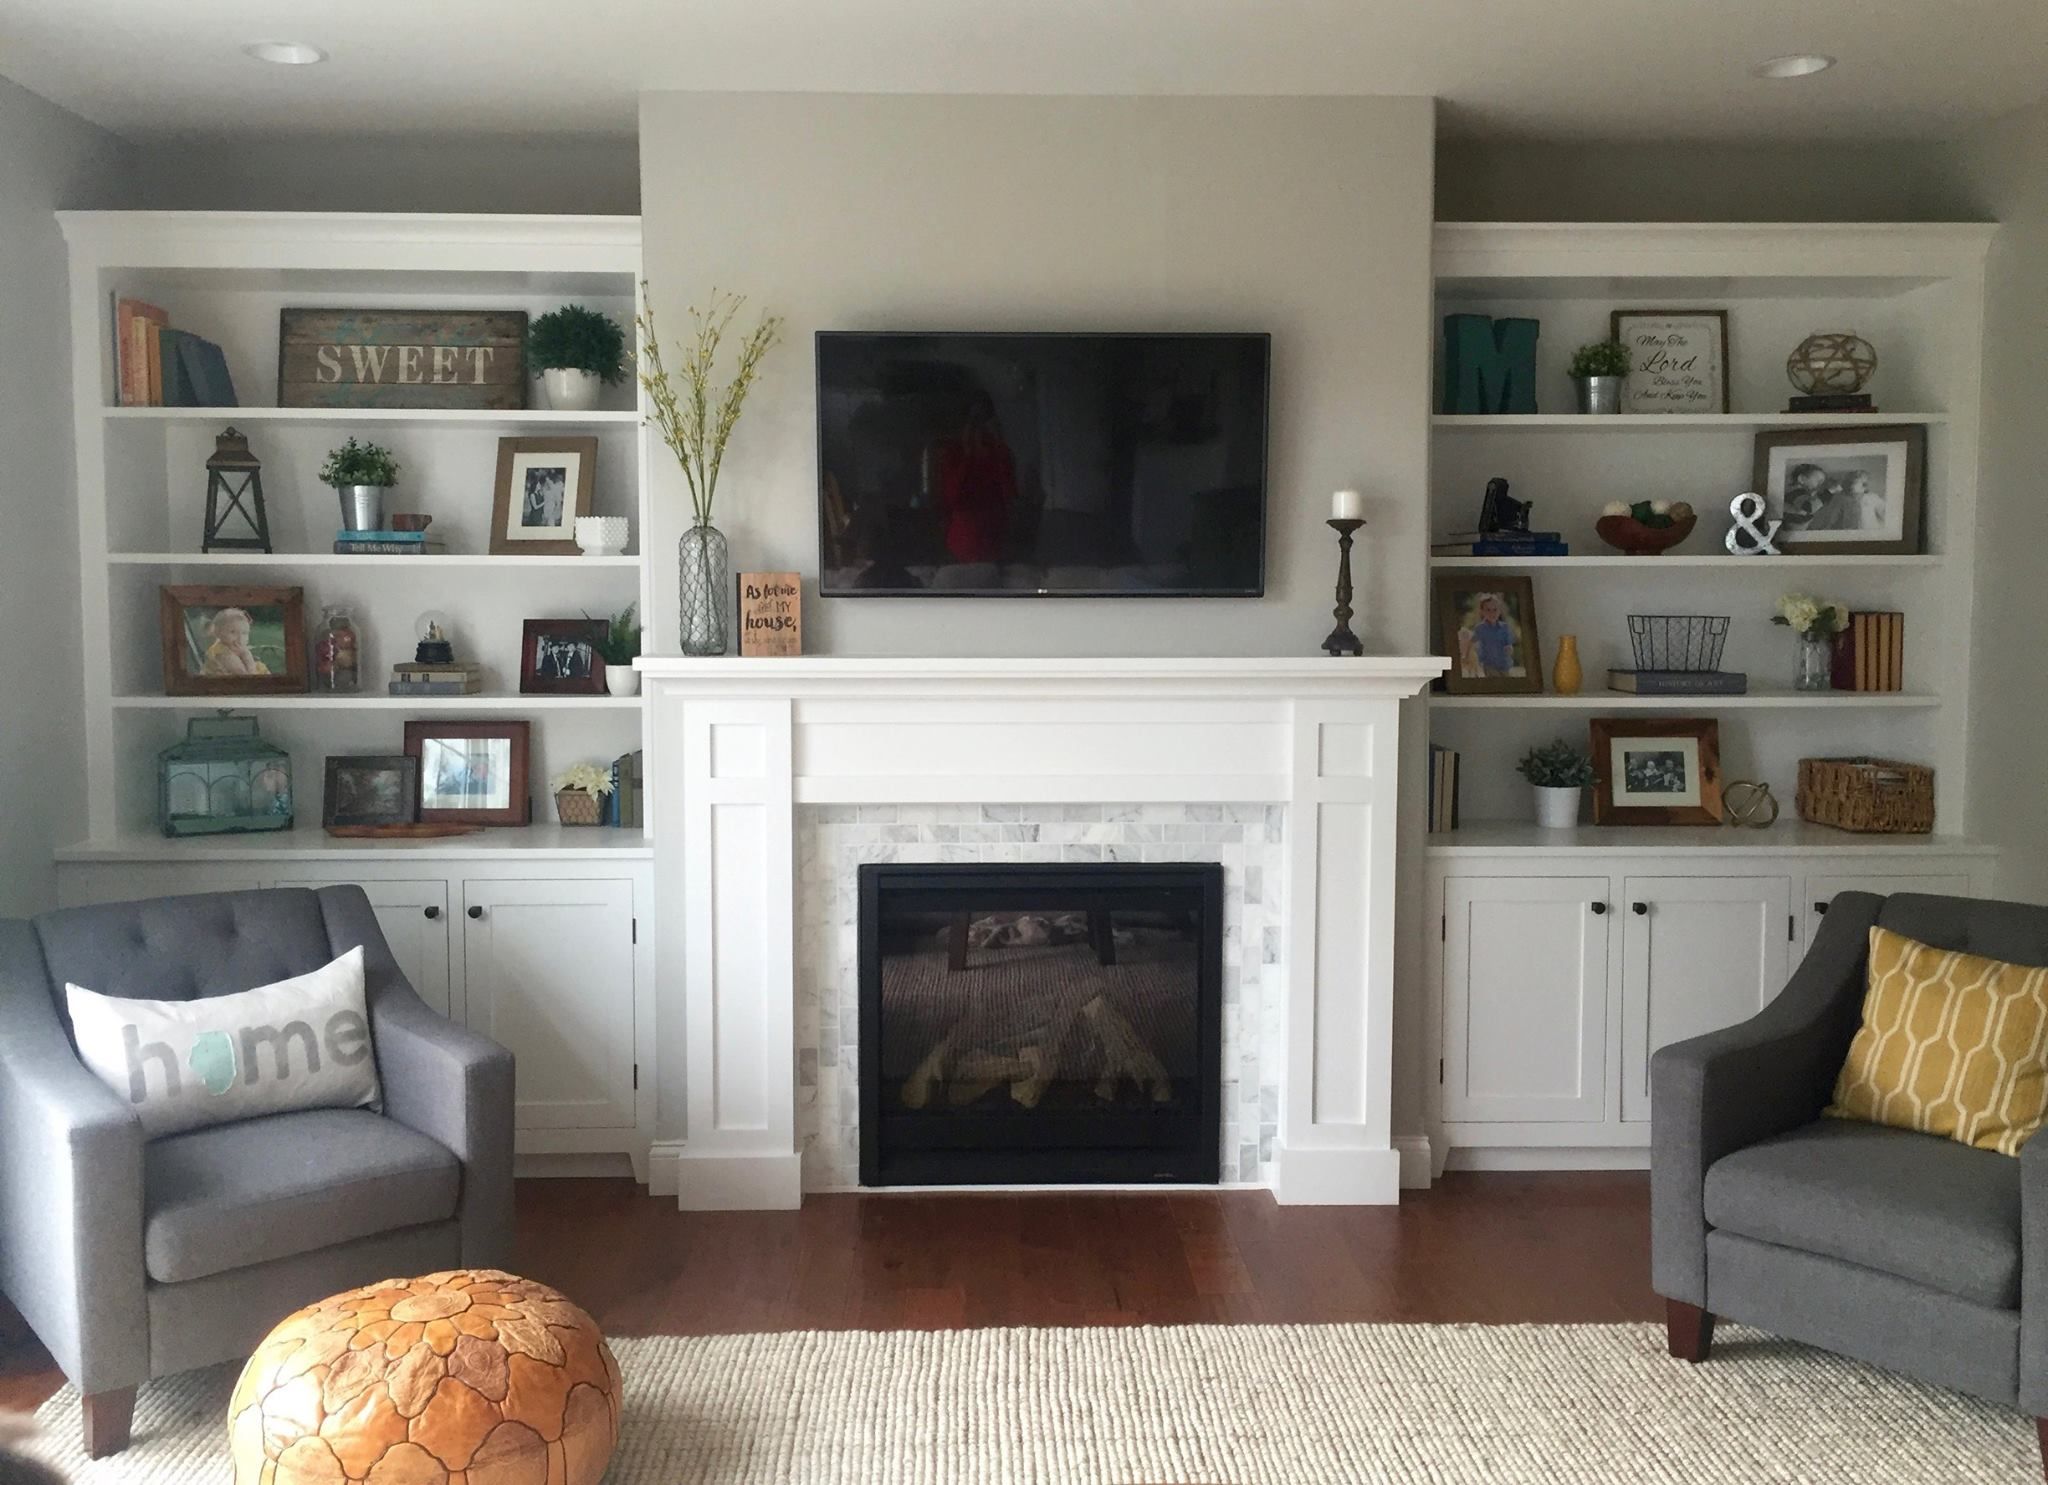 Fireplace Mantel Height Unique How to Build A Built In the Cabinets Woodworking